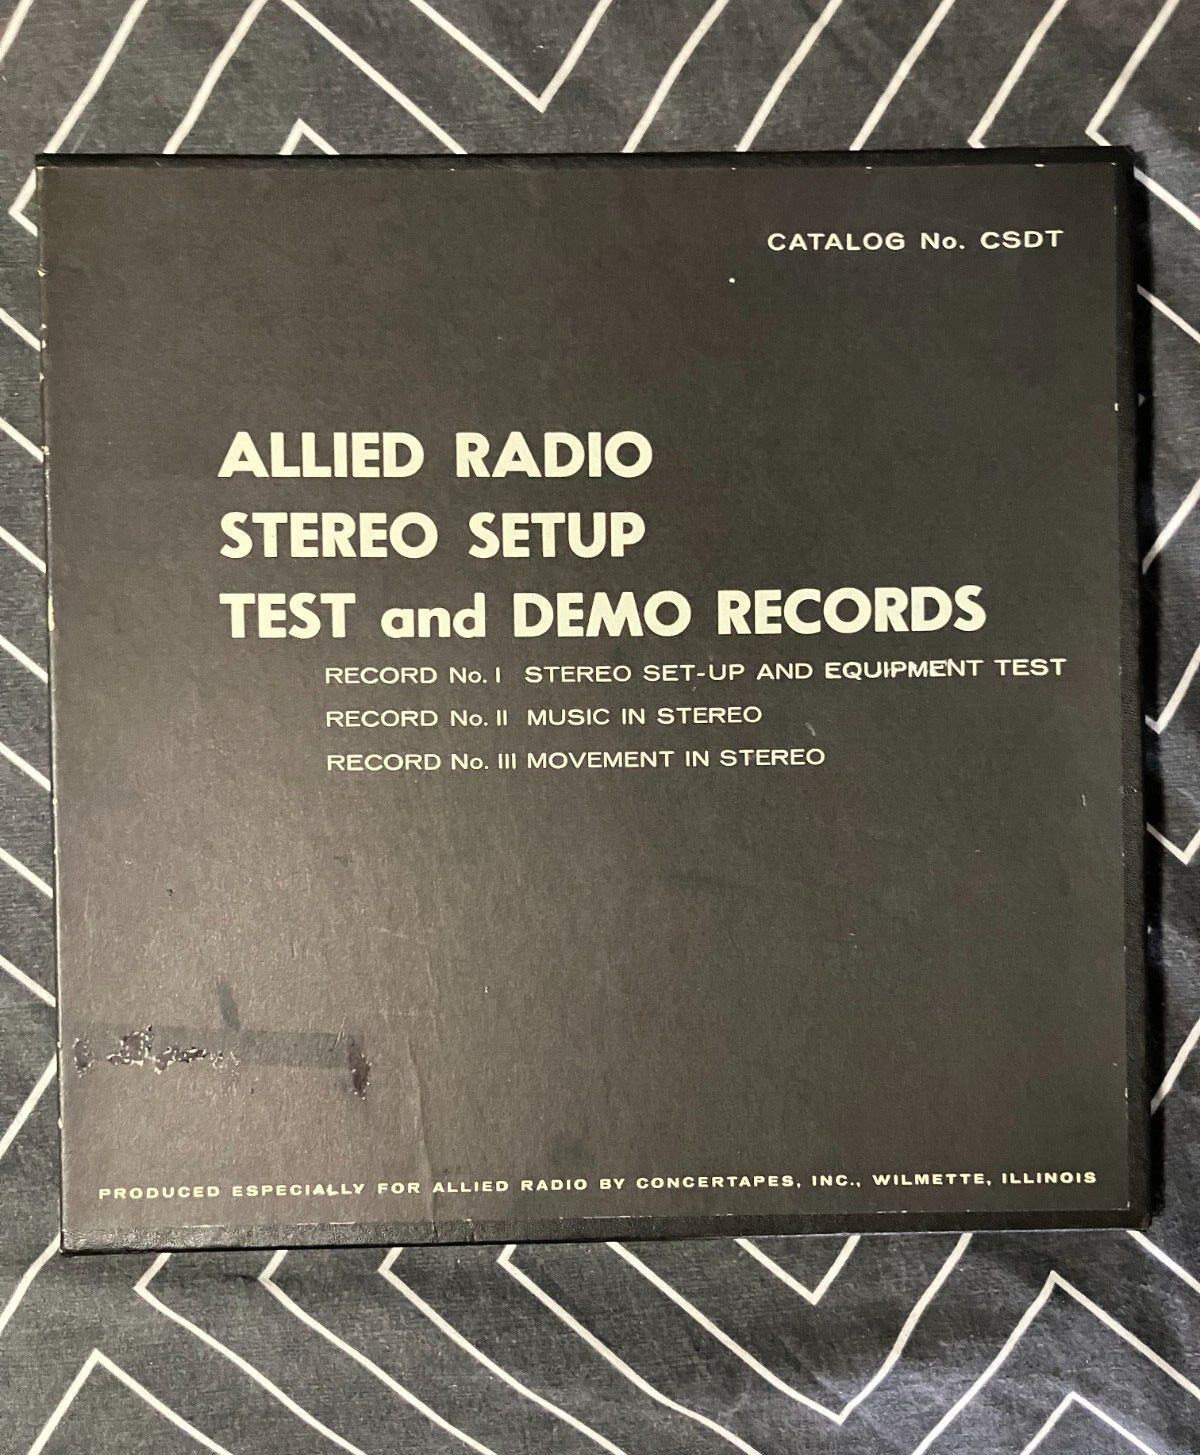 Allied Radio Stereo Setup Test and Demo Records 3 Vinyl Records Box Set Preowned